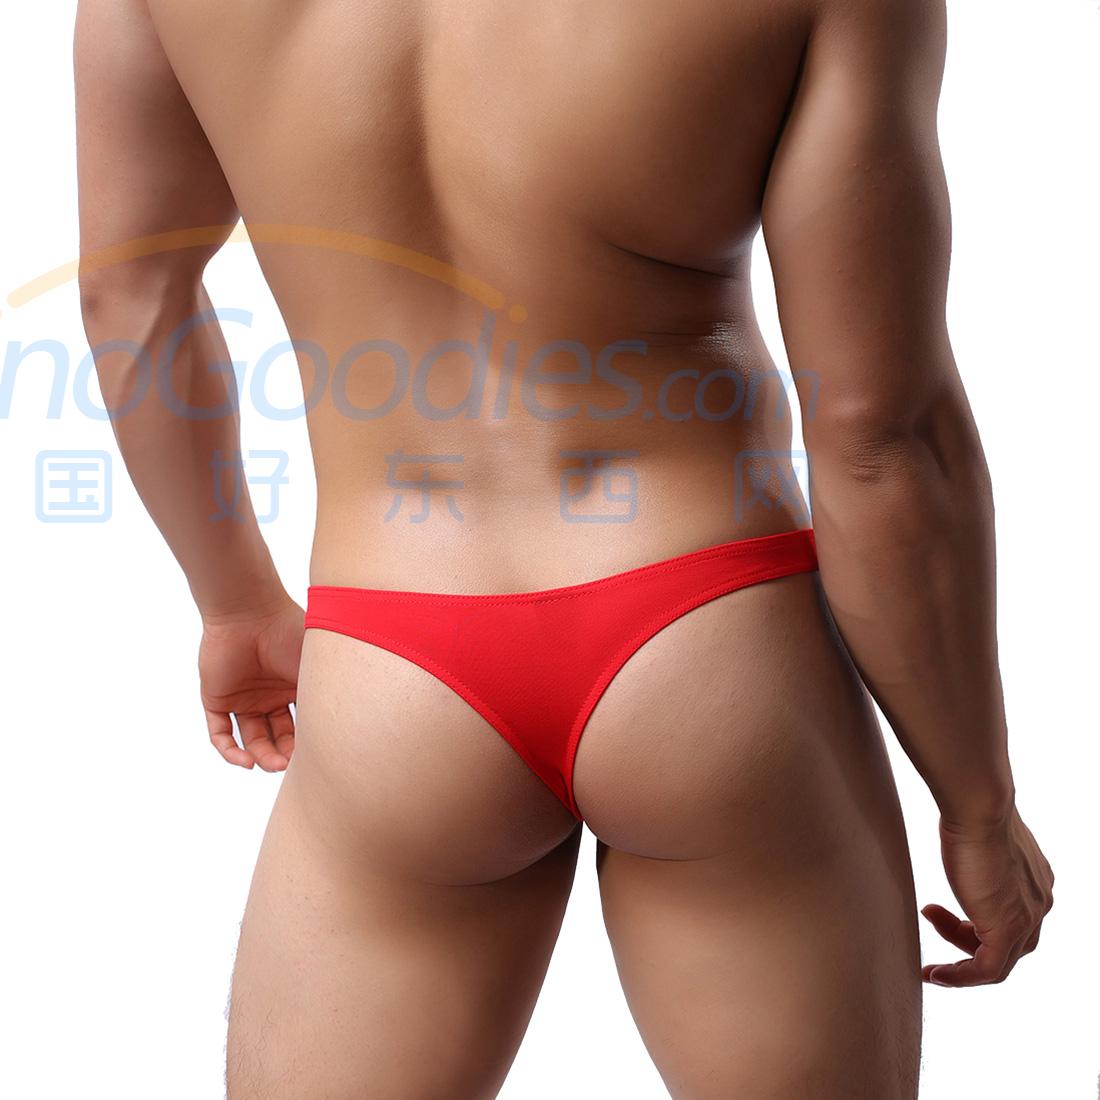 Men's Sexy Lingerie Underwear Modal Triangle Pants Shorts with Penis Sheath JET Bikini WH9 Red L